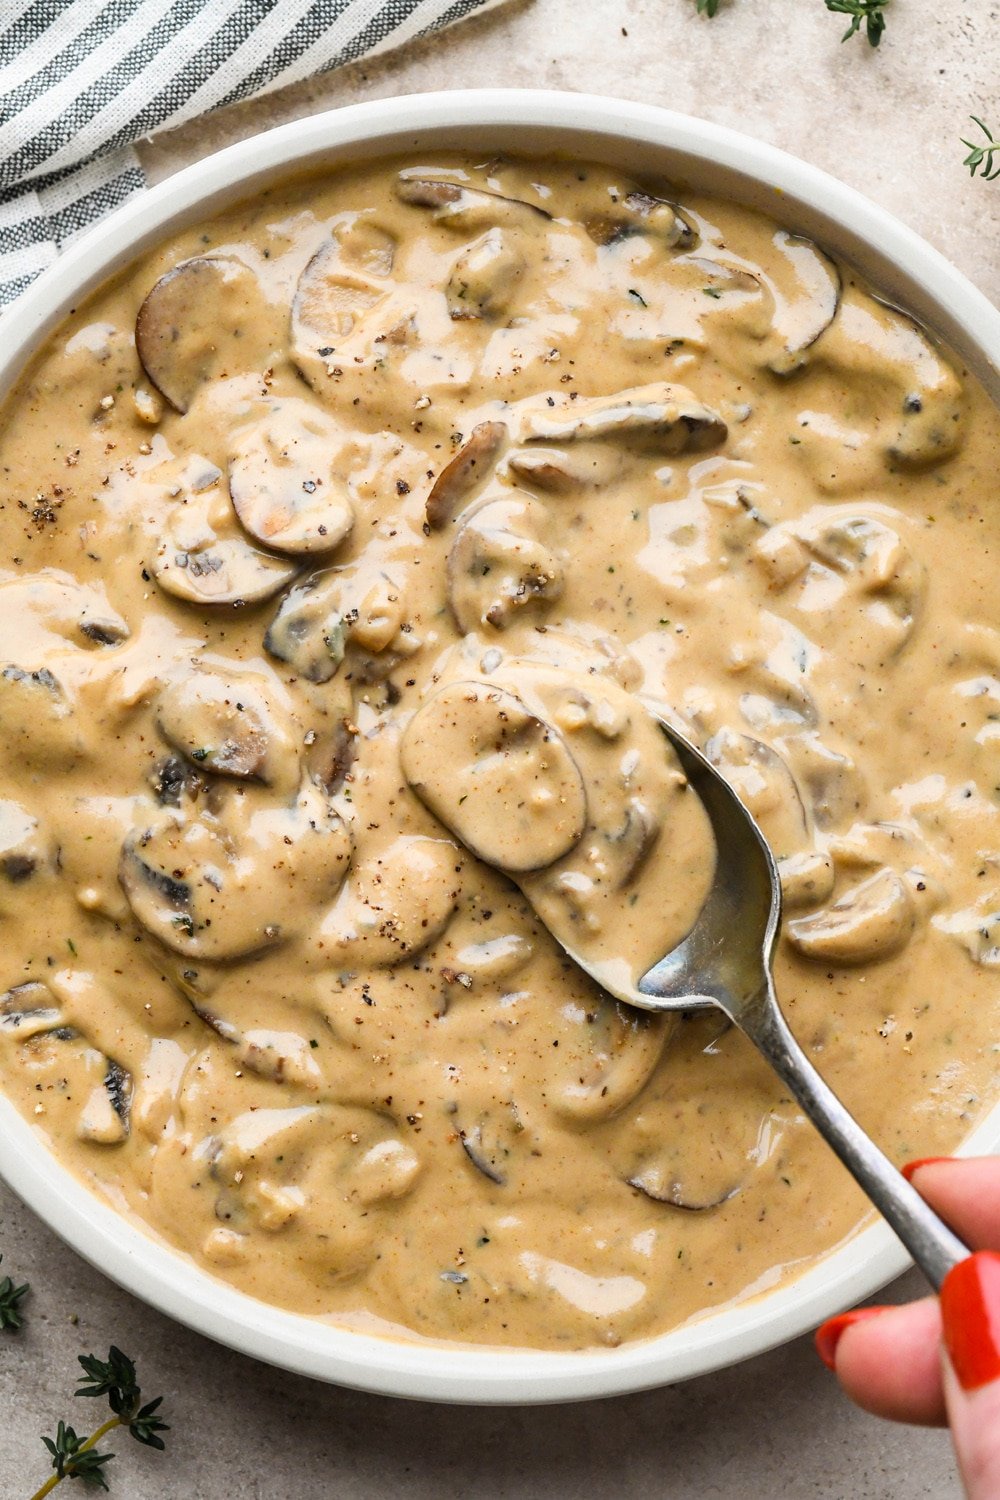 Creamy gluten free and dairy free mushroom gravy in a shallow ceramic serving bowl, with a spoon lifting out a portion of the gravy to show the texture.